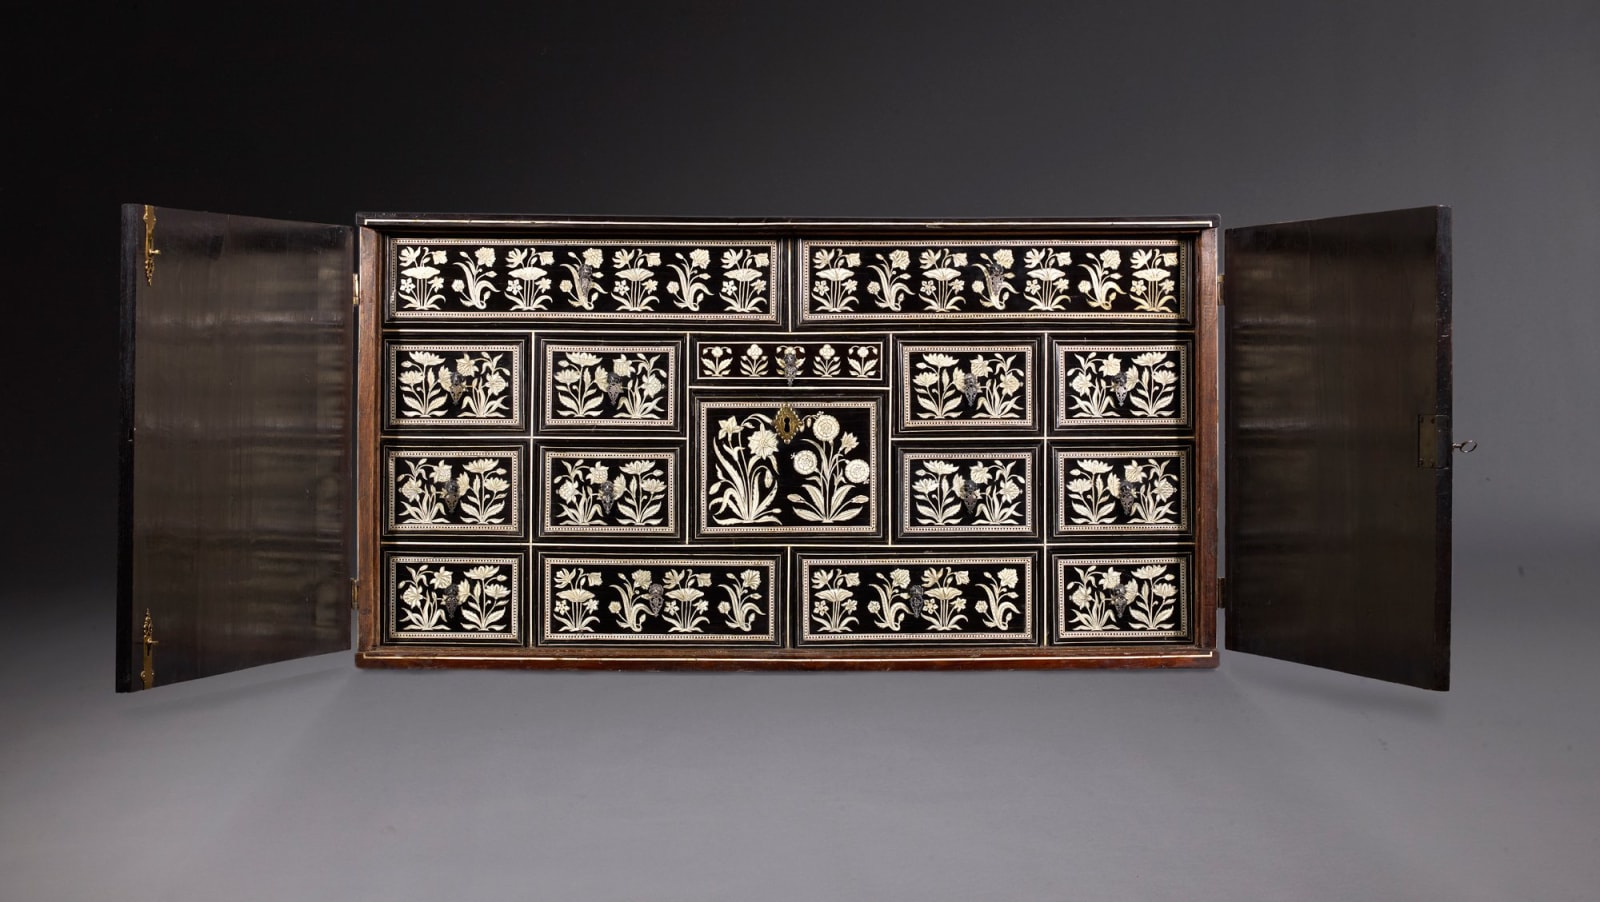 Two Door Cabinet with Large Flowering Plants, Gujarat, Sindh or Deccan, c. 1700